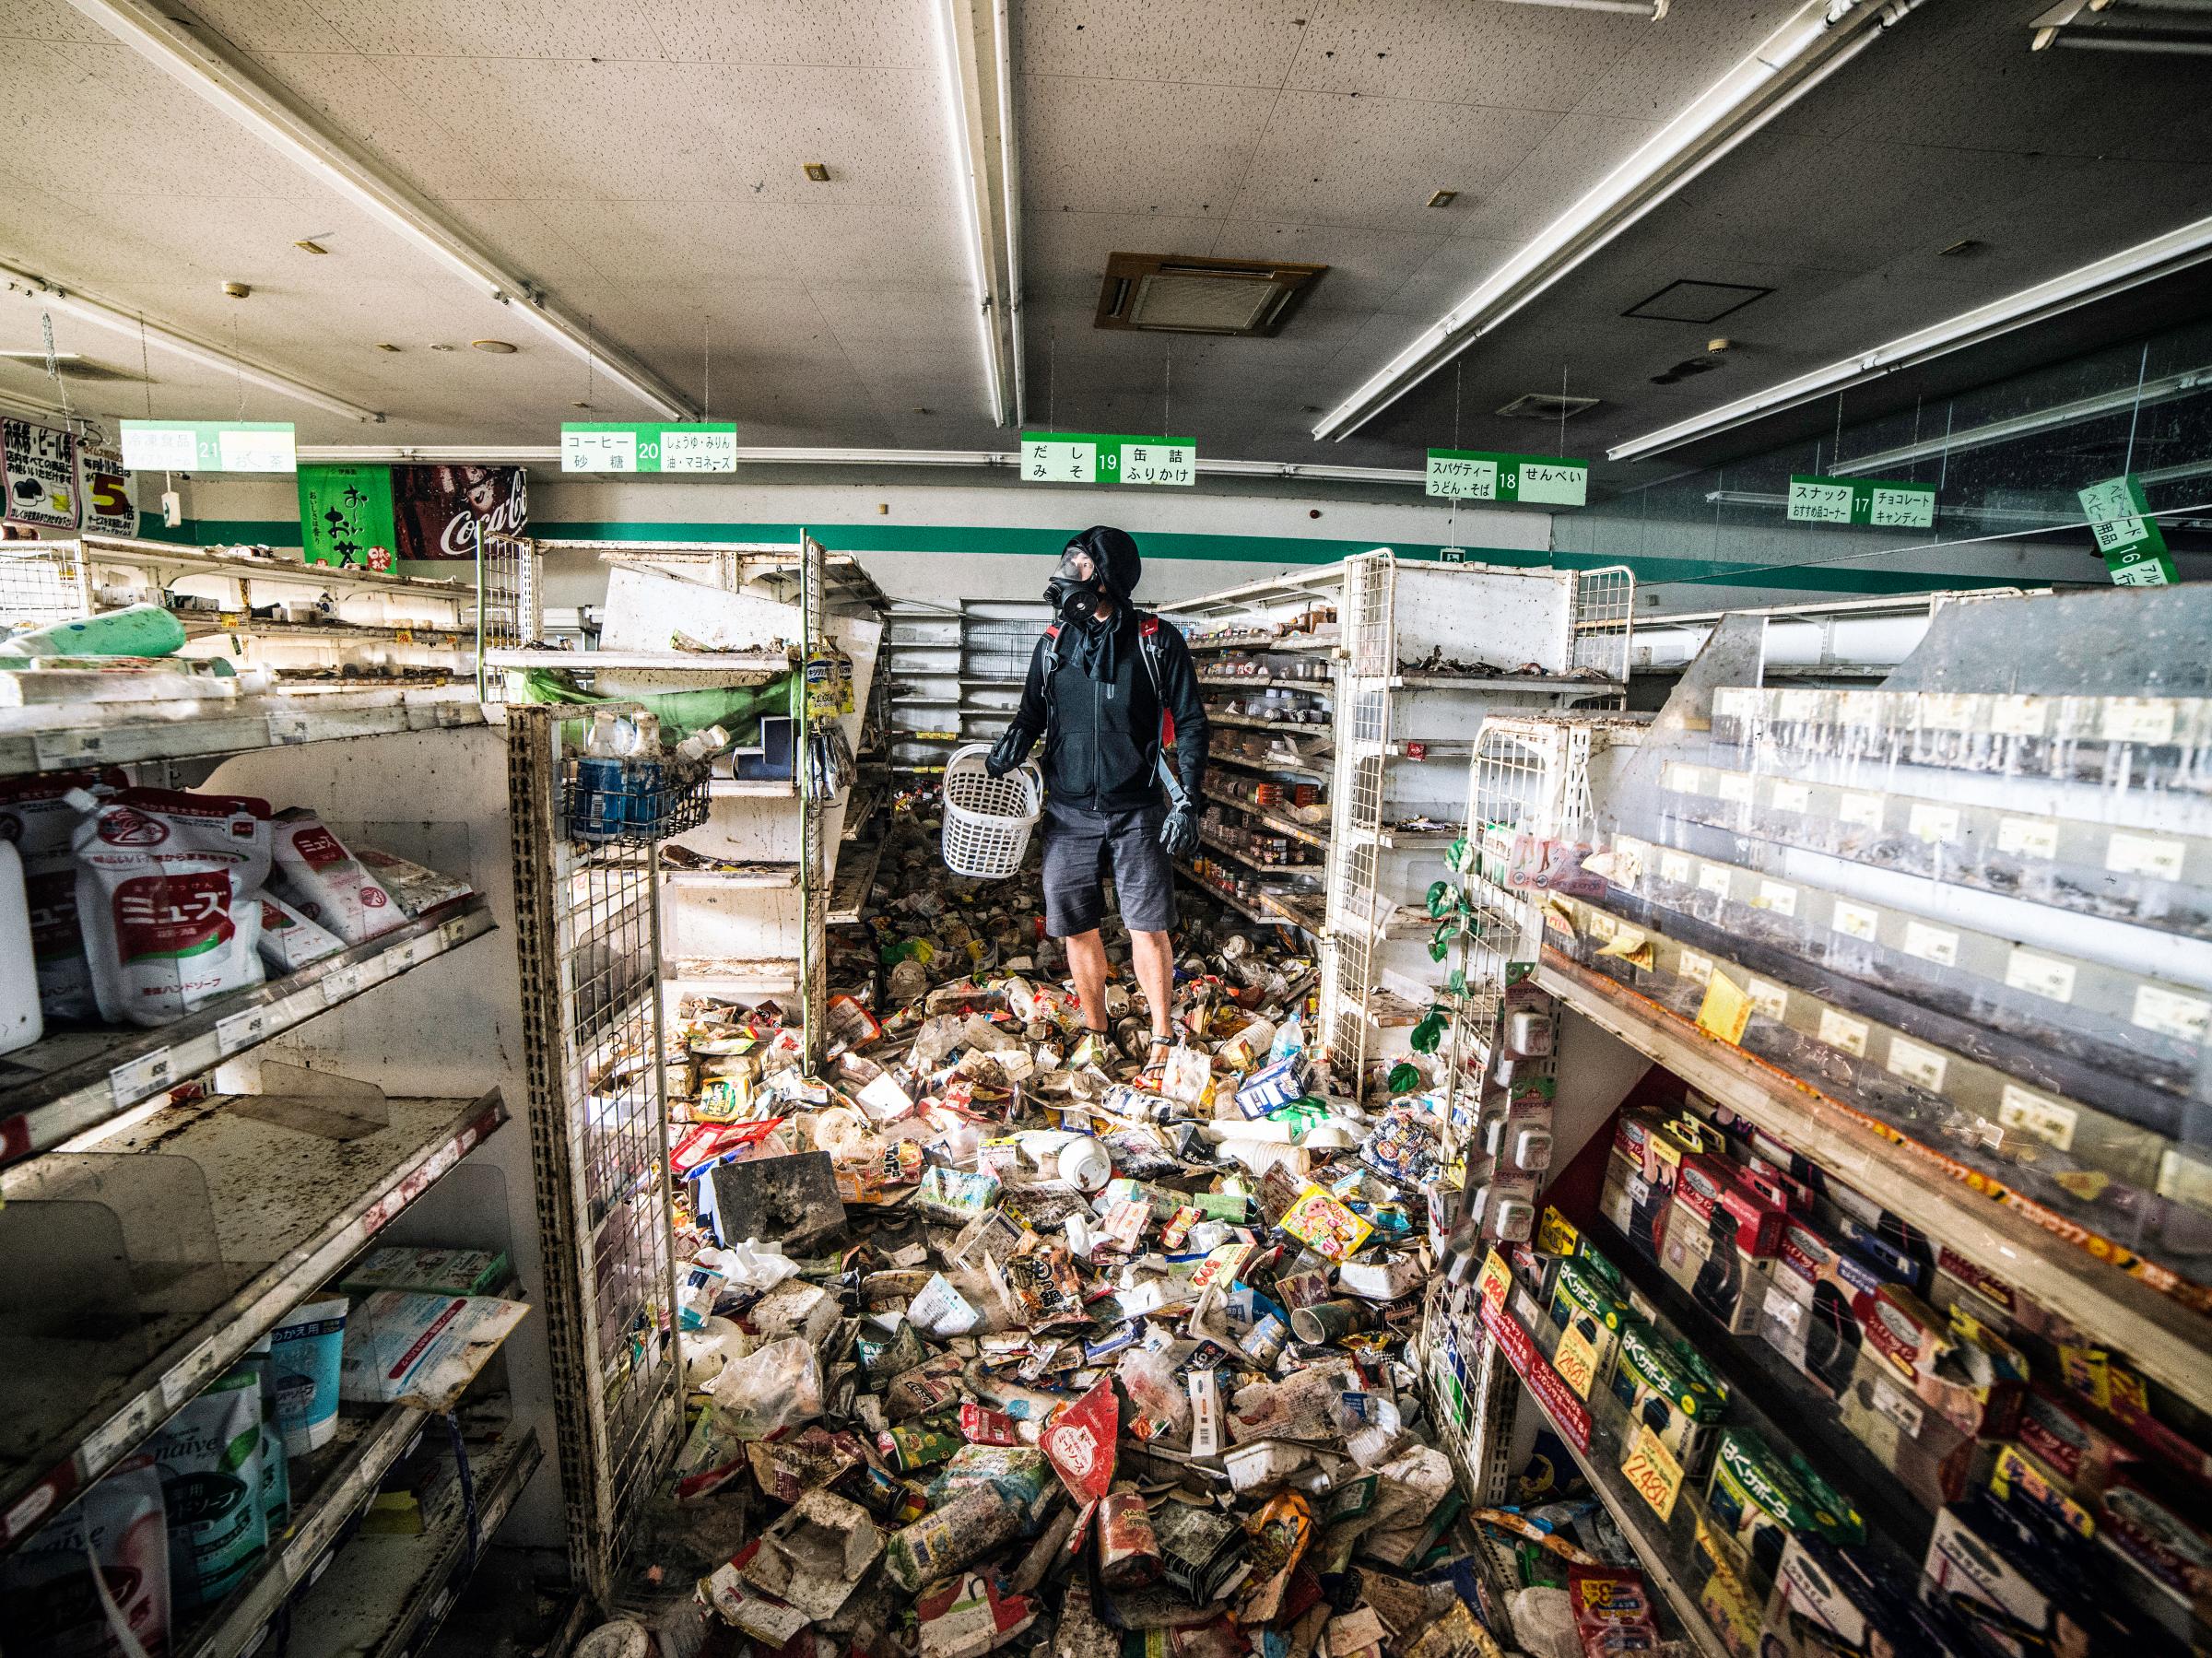 Malaysian photographer Keow Wee Loong ventured — ghostlike, if you will — into the Fukushima Exclusion Zone, within the twelve-mile radius around the old power plant, in June. The photographer "shops" in the super market York Benimaru on June 4, 2016.